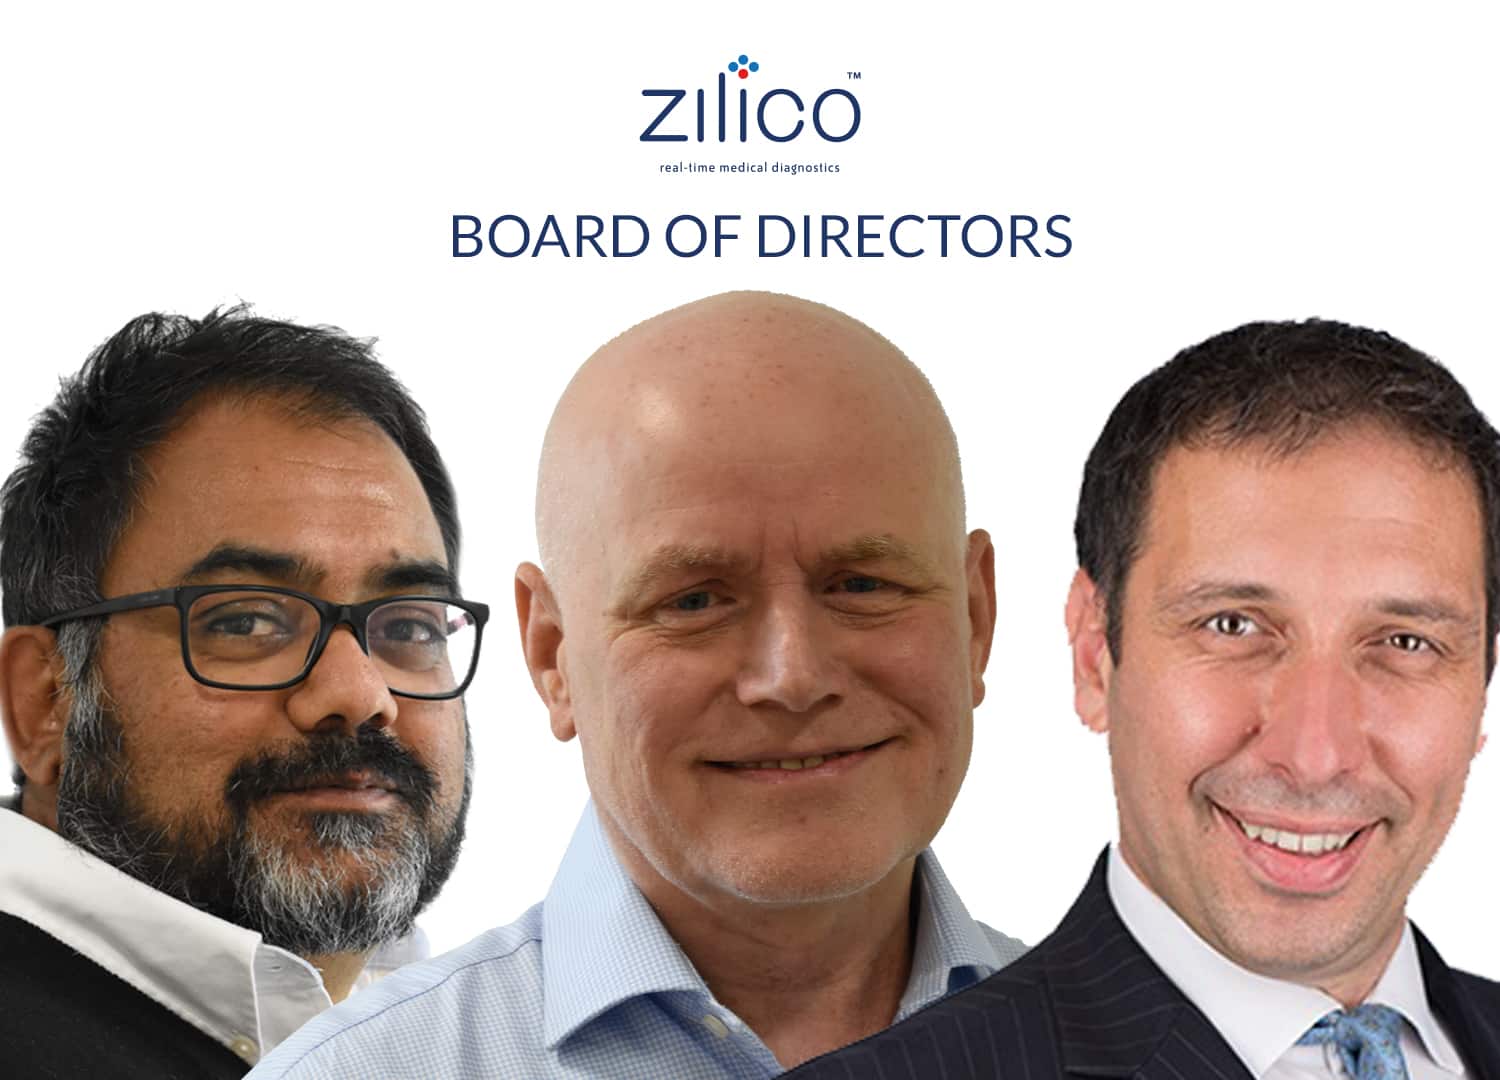  Zilico secures Growth Private Equity investment from Deepbridge Capital